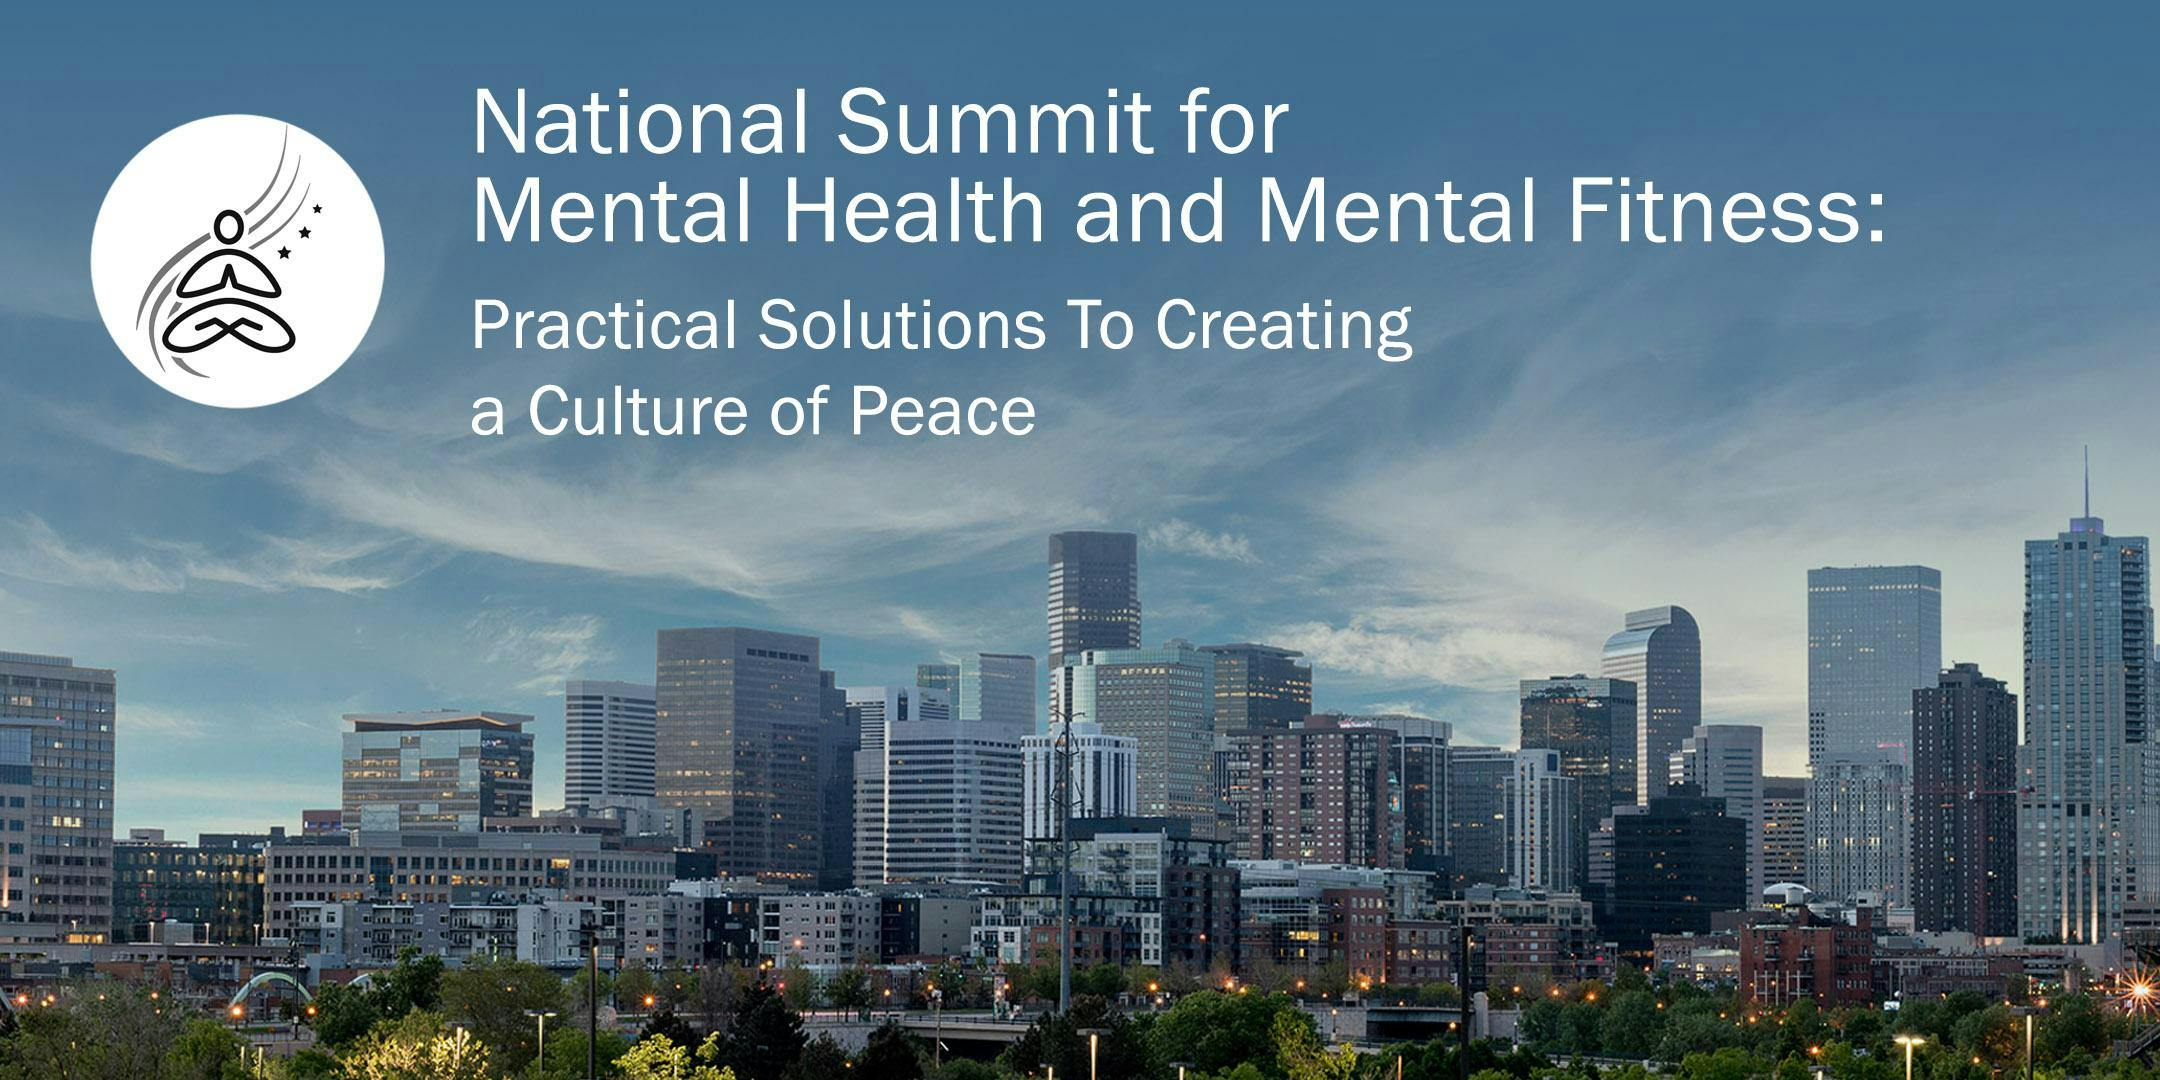 National Summit for Mental Health and Mental Fitness